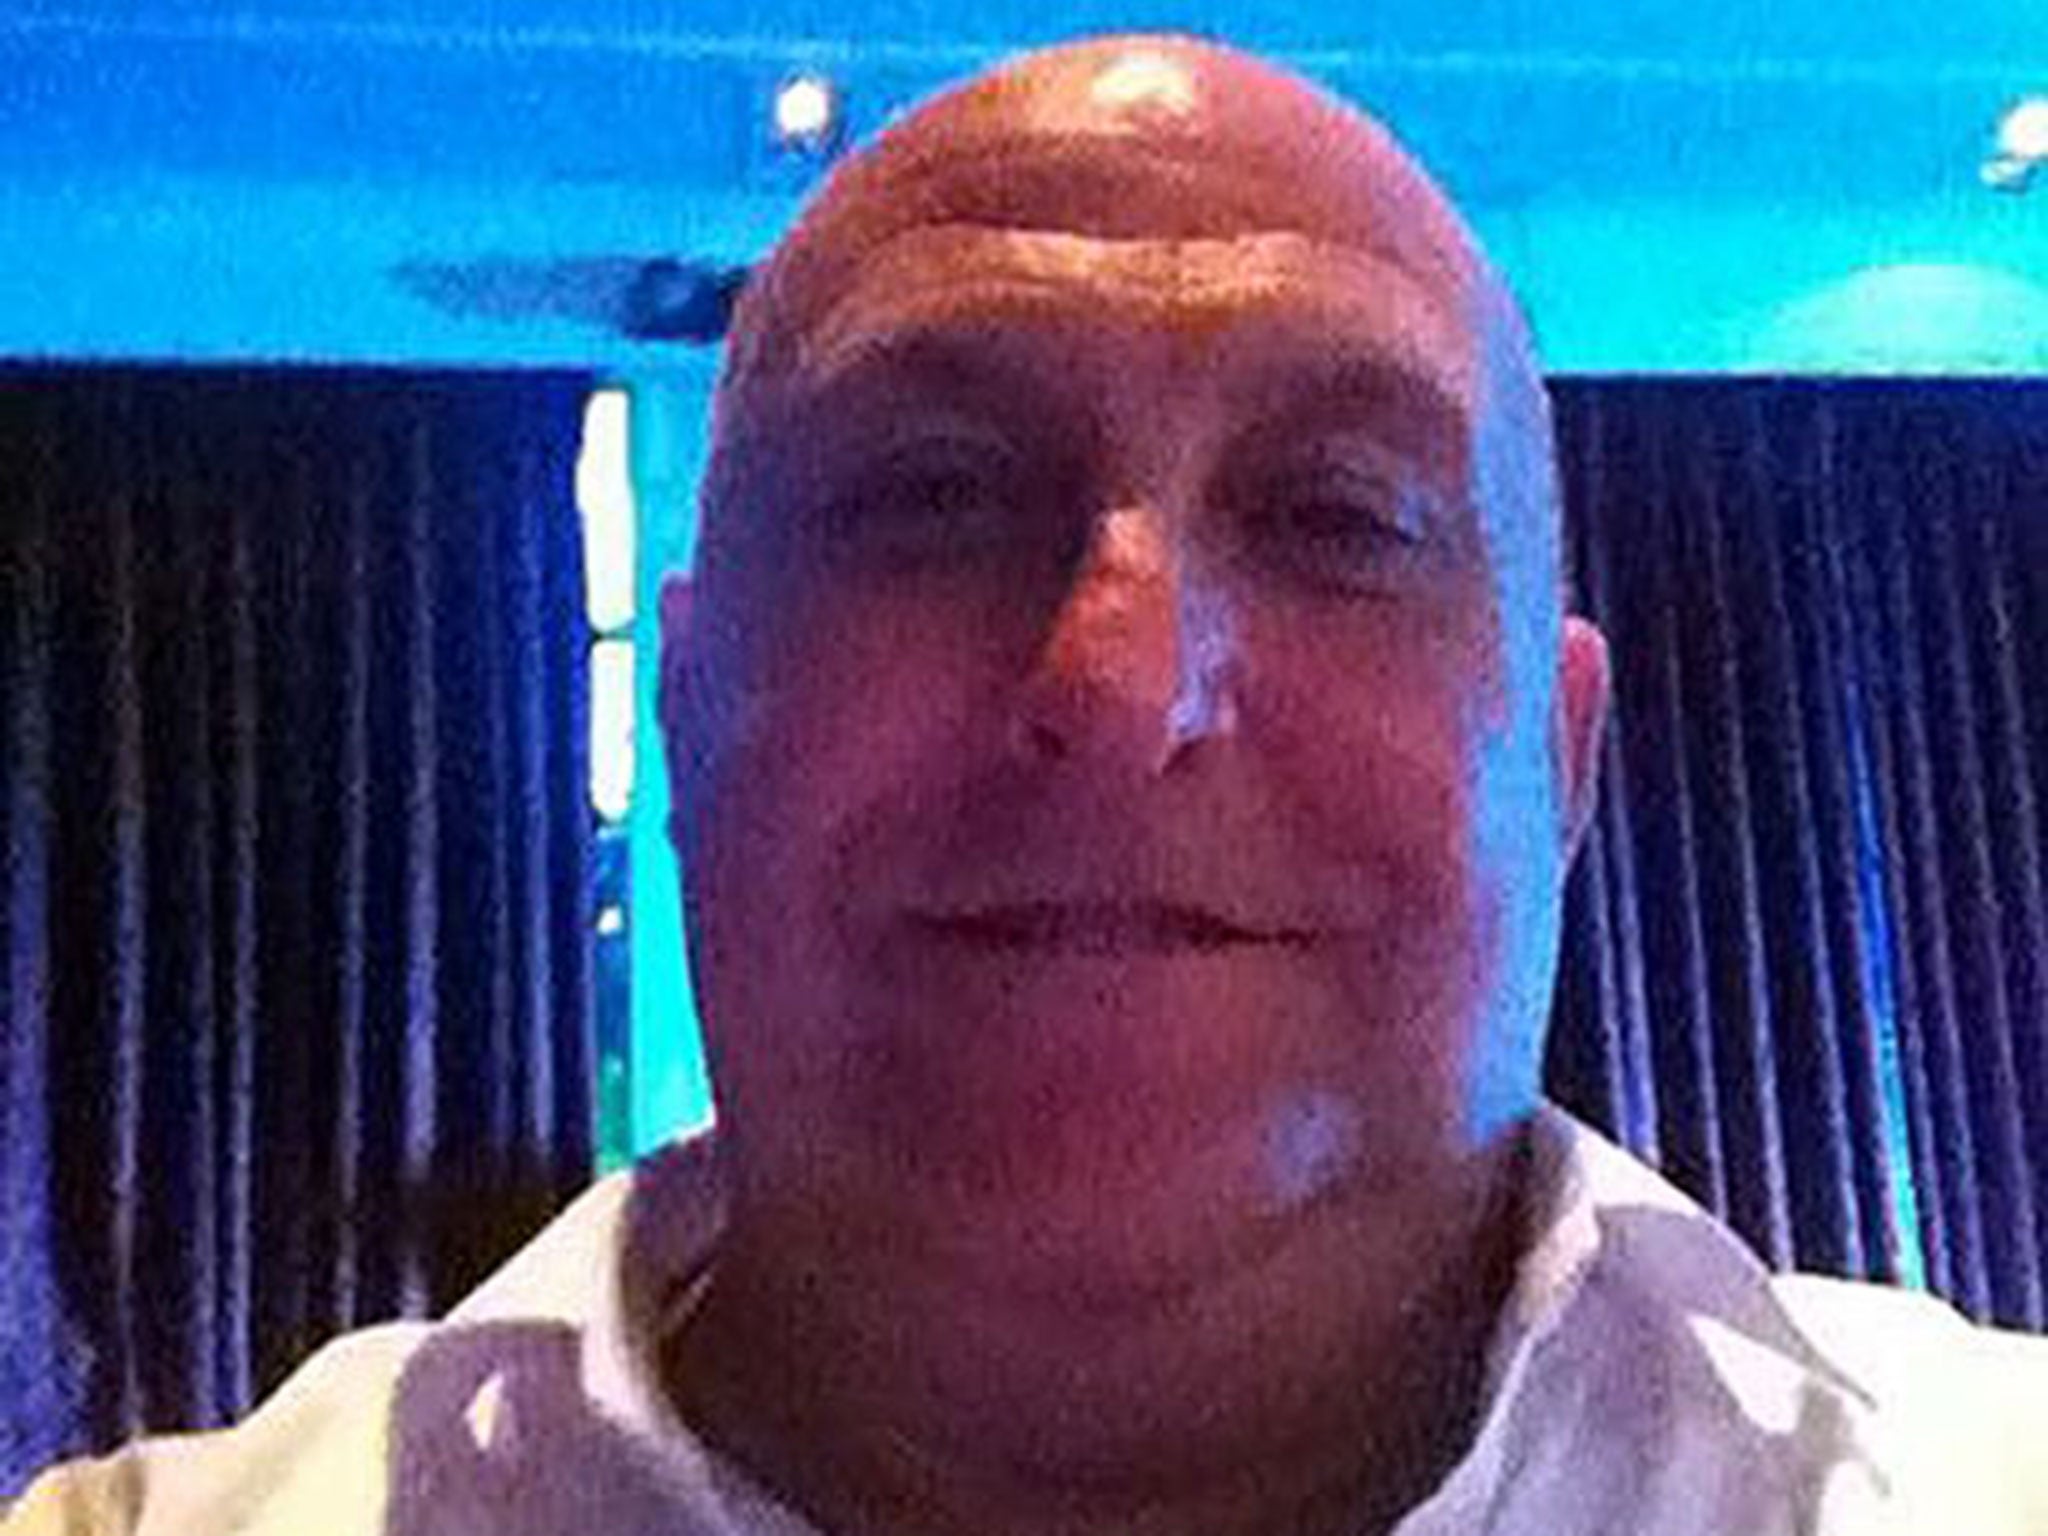 Gordon Semple was last seen on 1 April after attending a work meeting